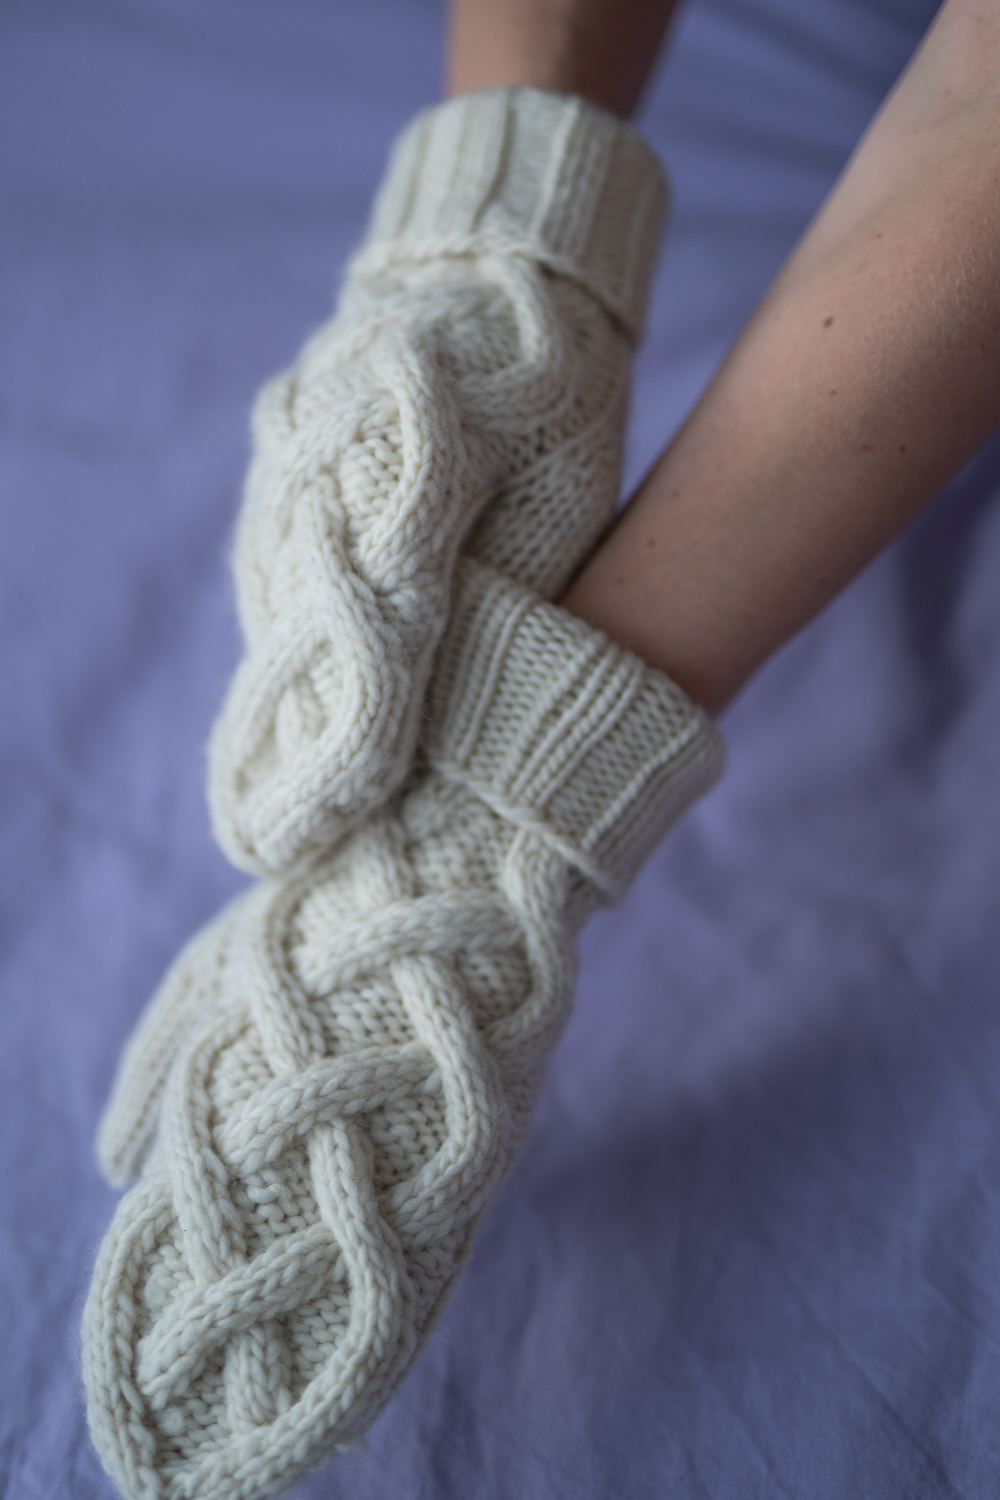  - Snow dance mittens | Cable knit mittens | Knitting kit - by HipKnitShop - 17/01/2021